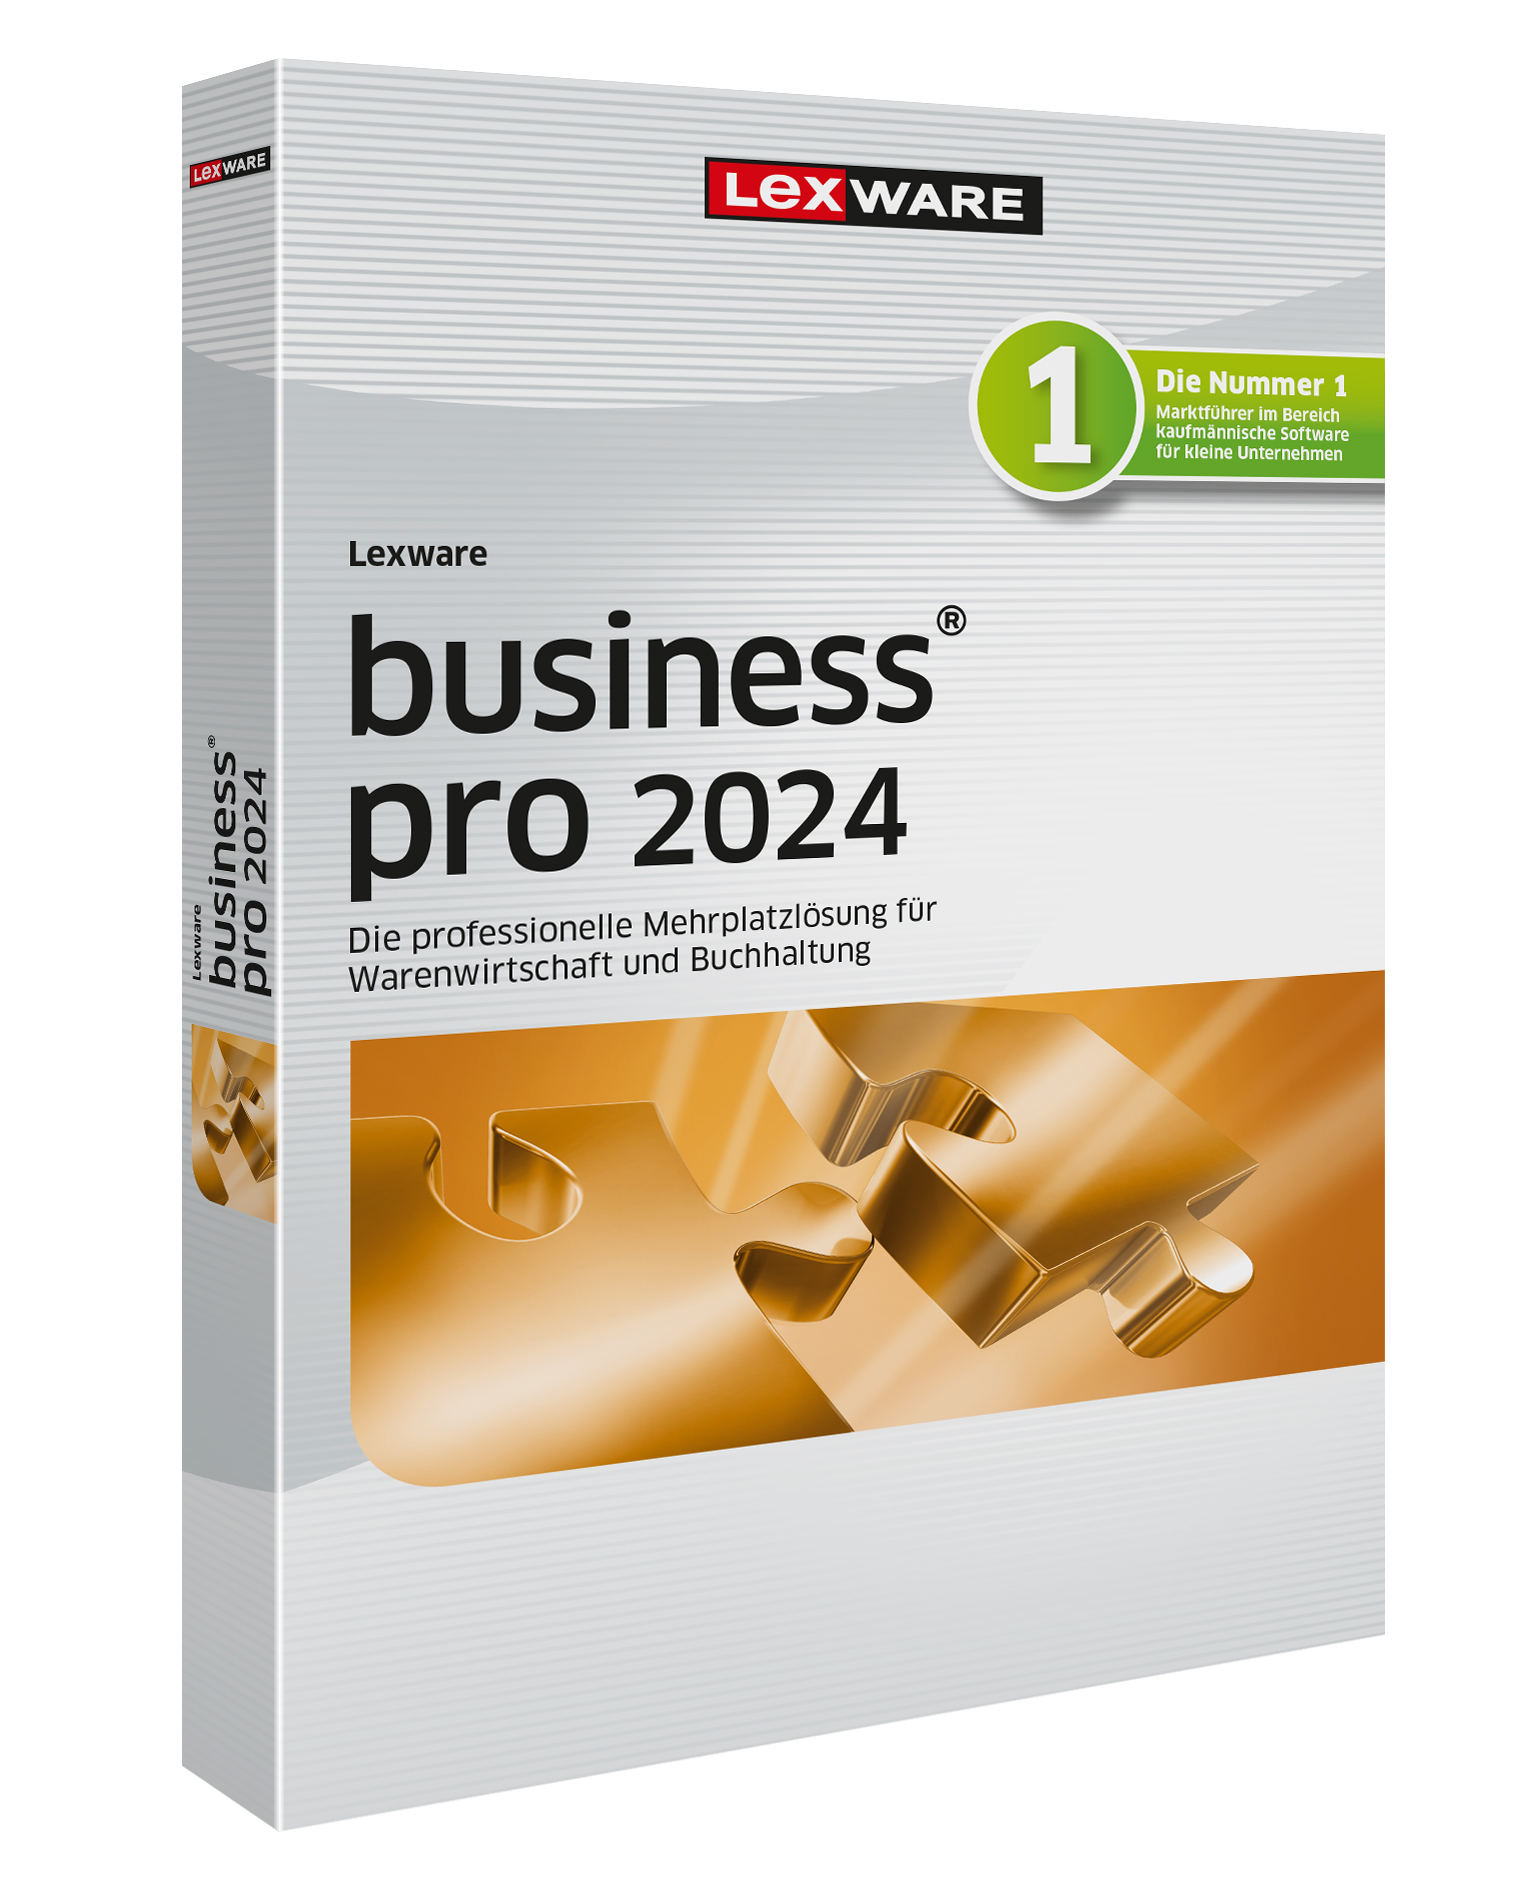 Lexware Business pro it-structures gmbh